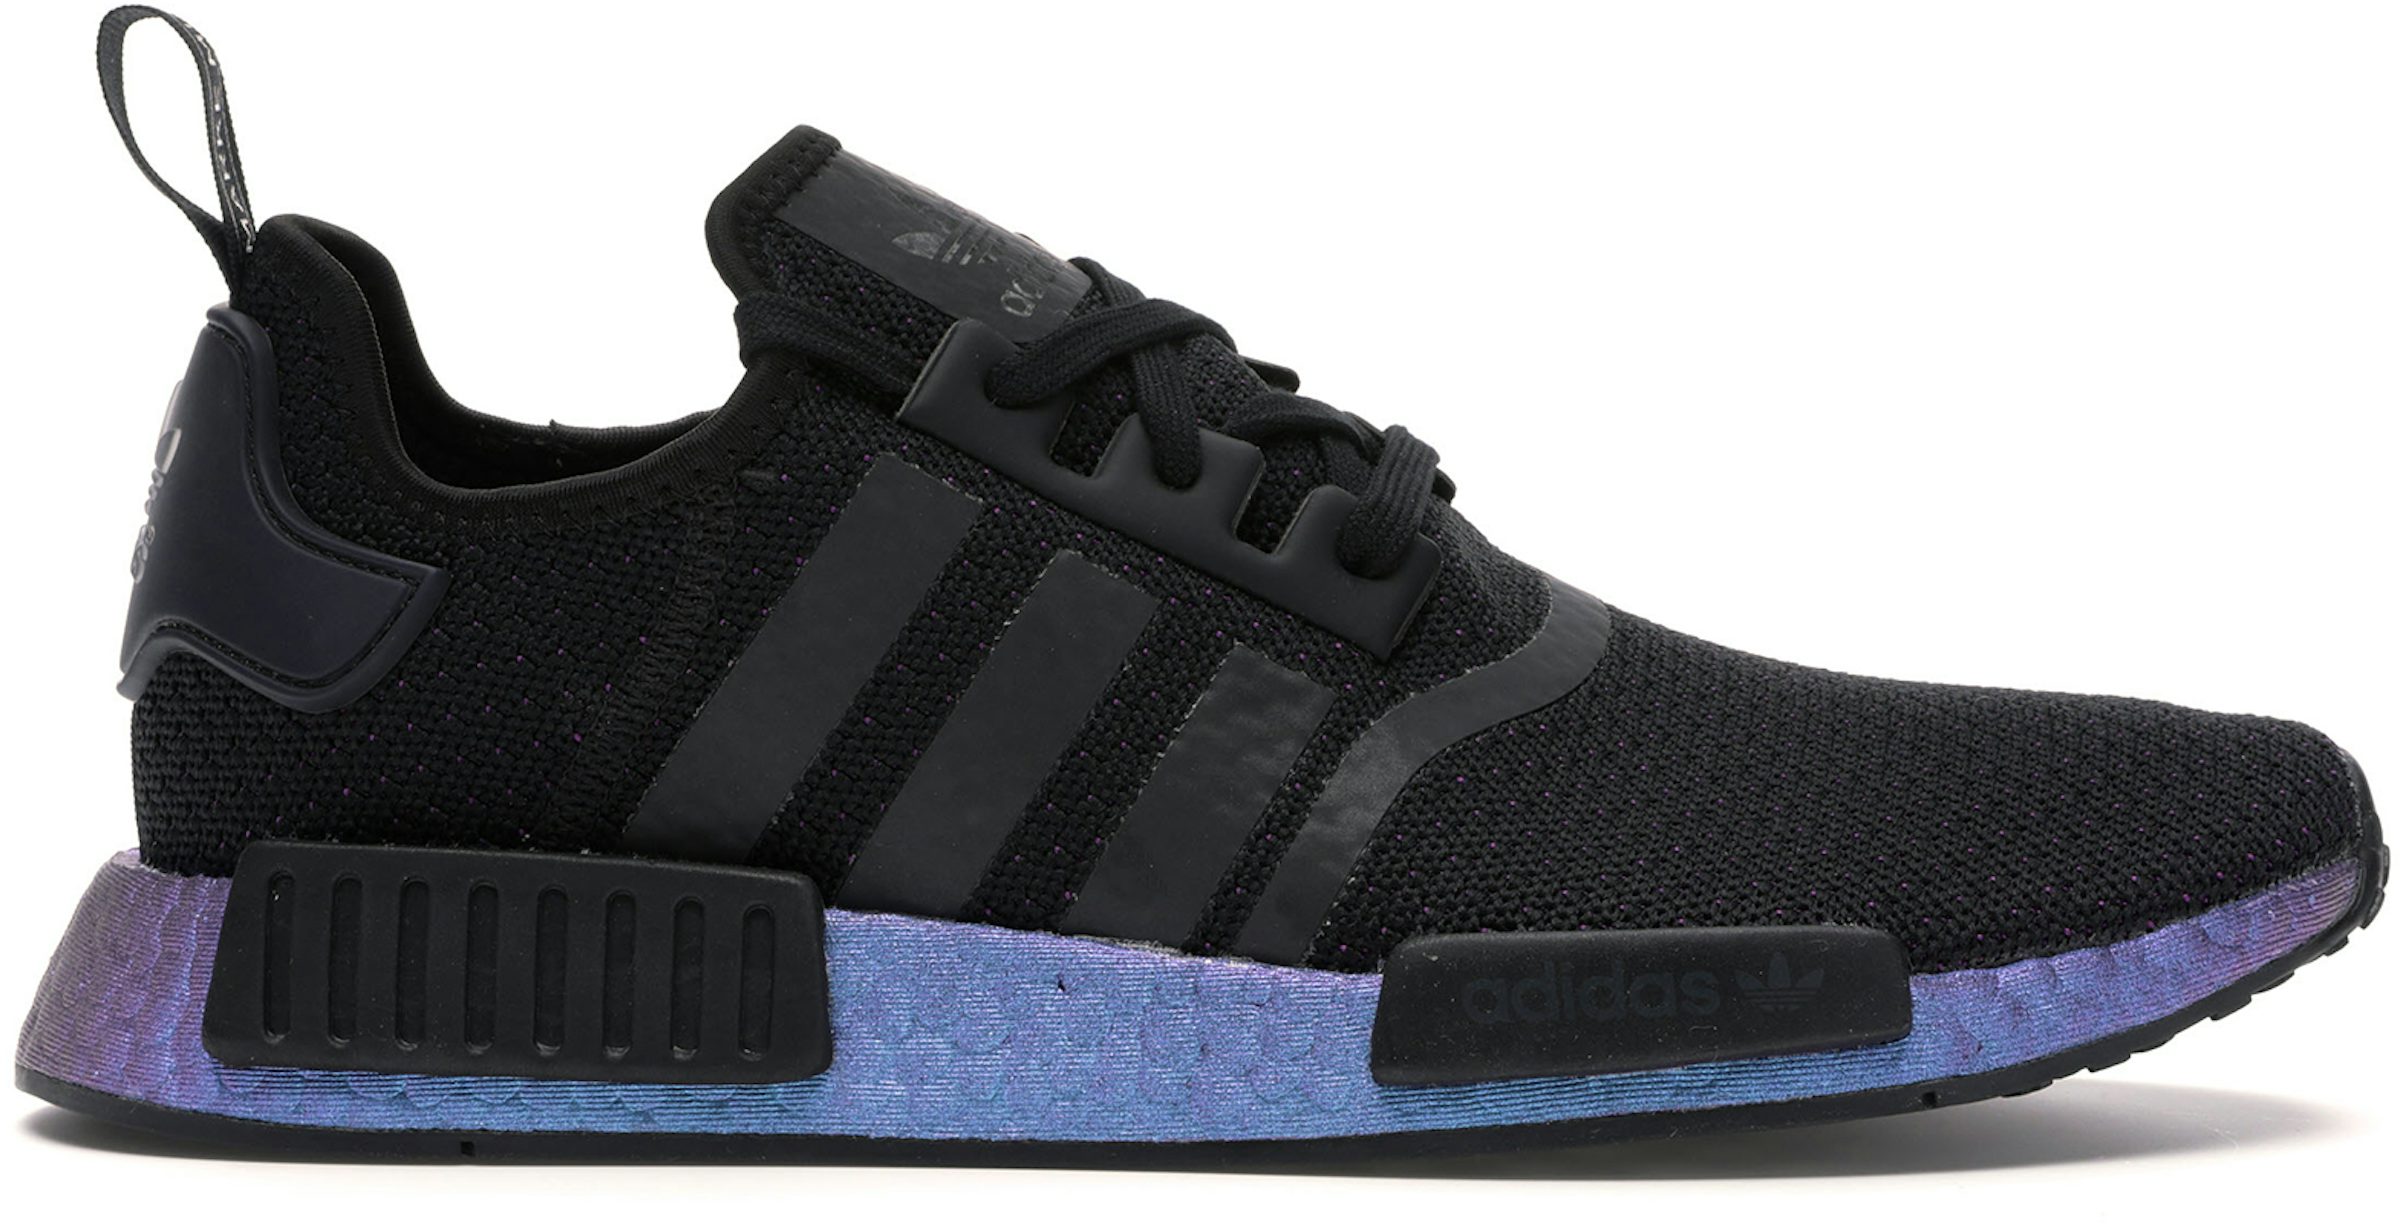 Buy NMD R1 Shoes New Sneakers - StockX